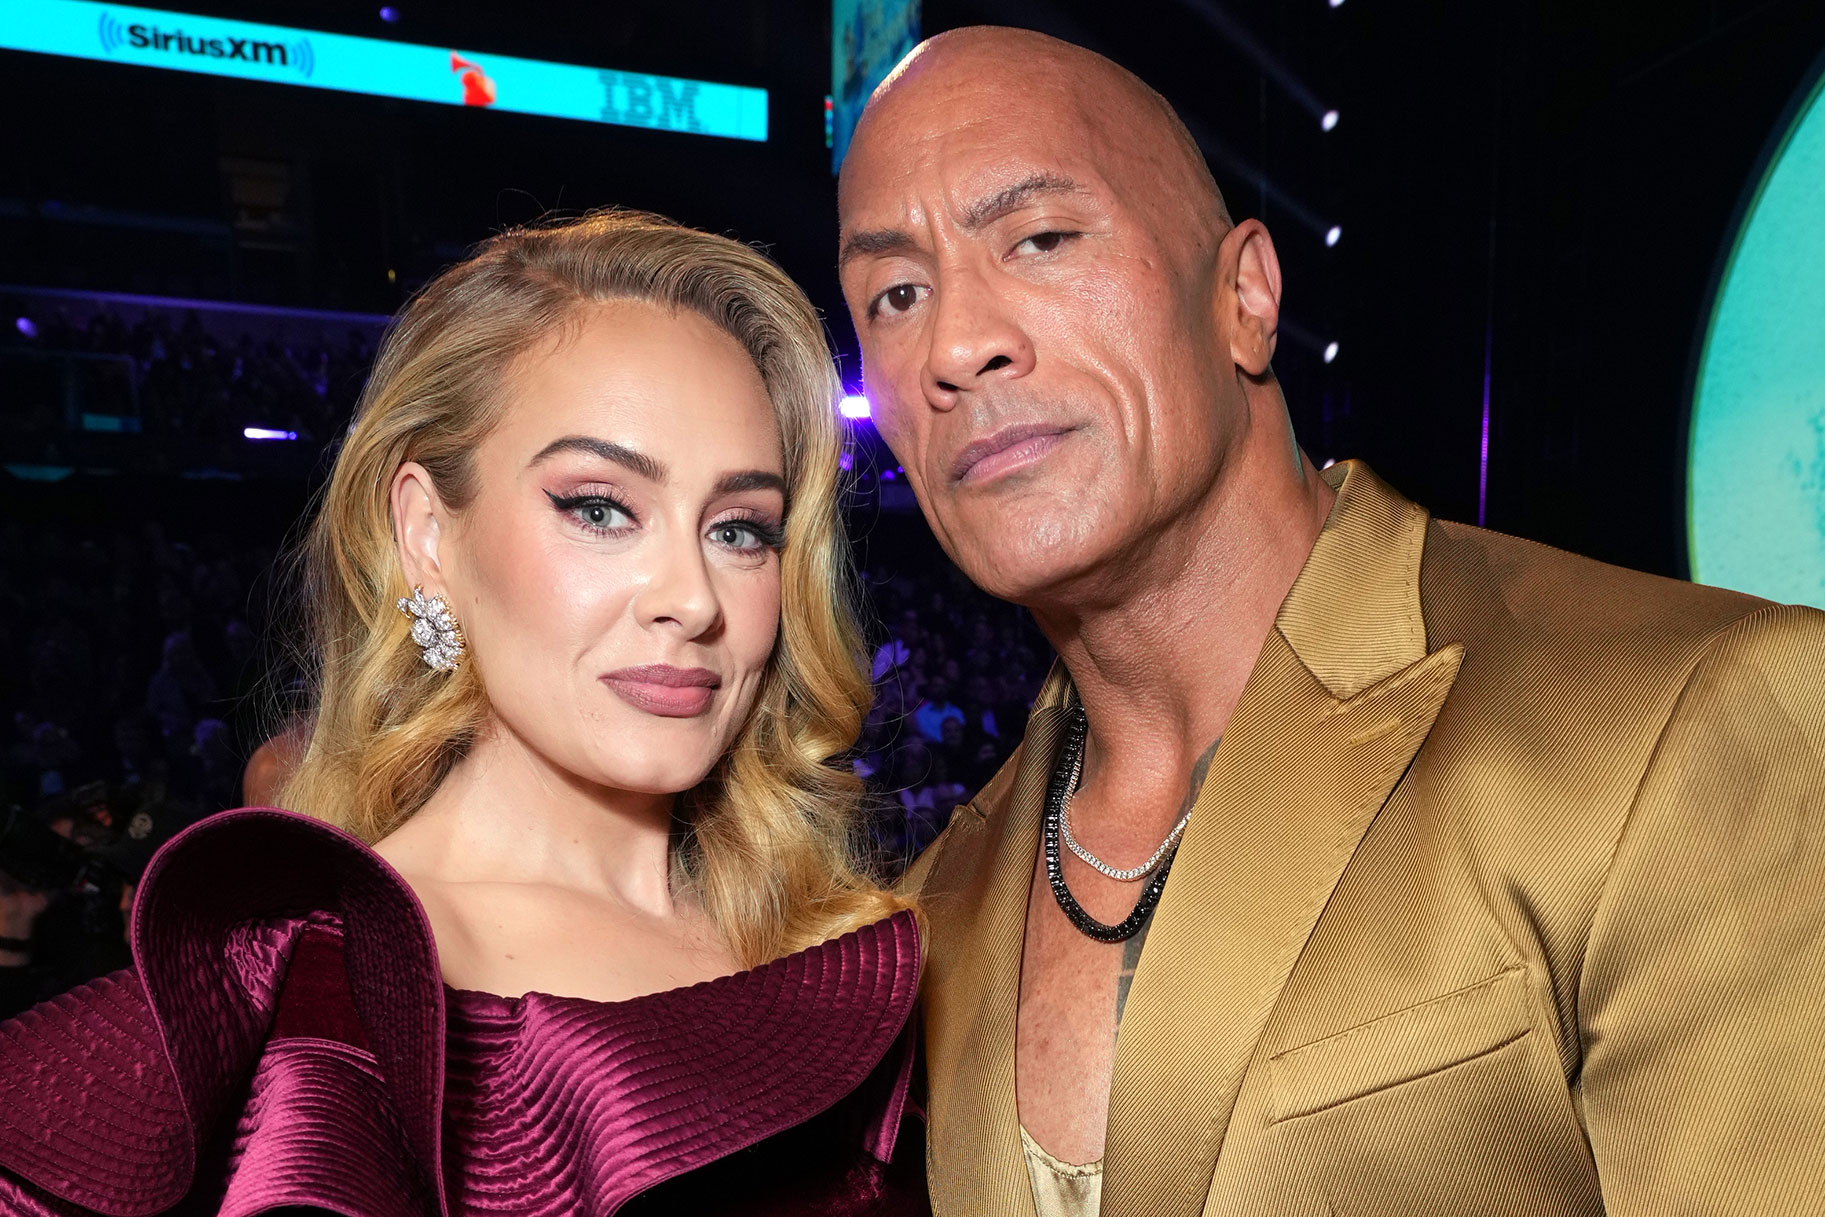 Adele and The Rock attend the Grammys